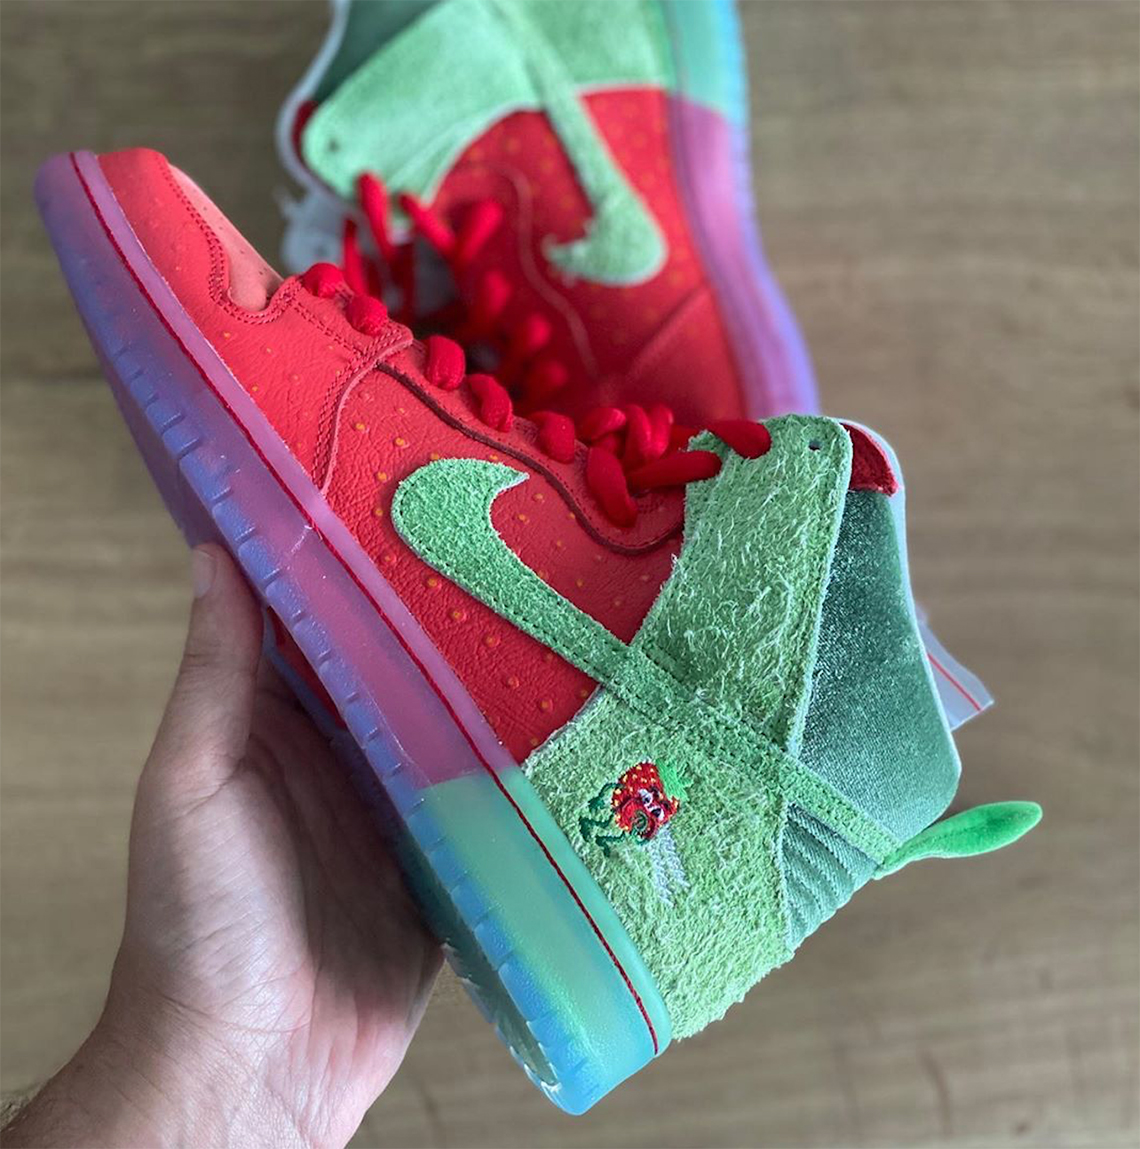 strawberry cough nike fluorescent sb dunk high 7